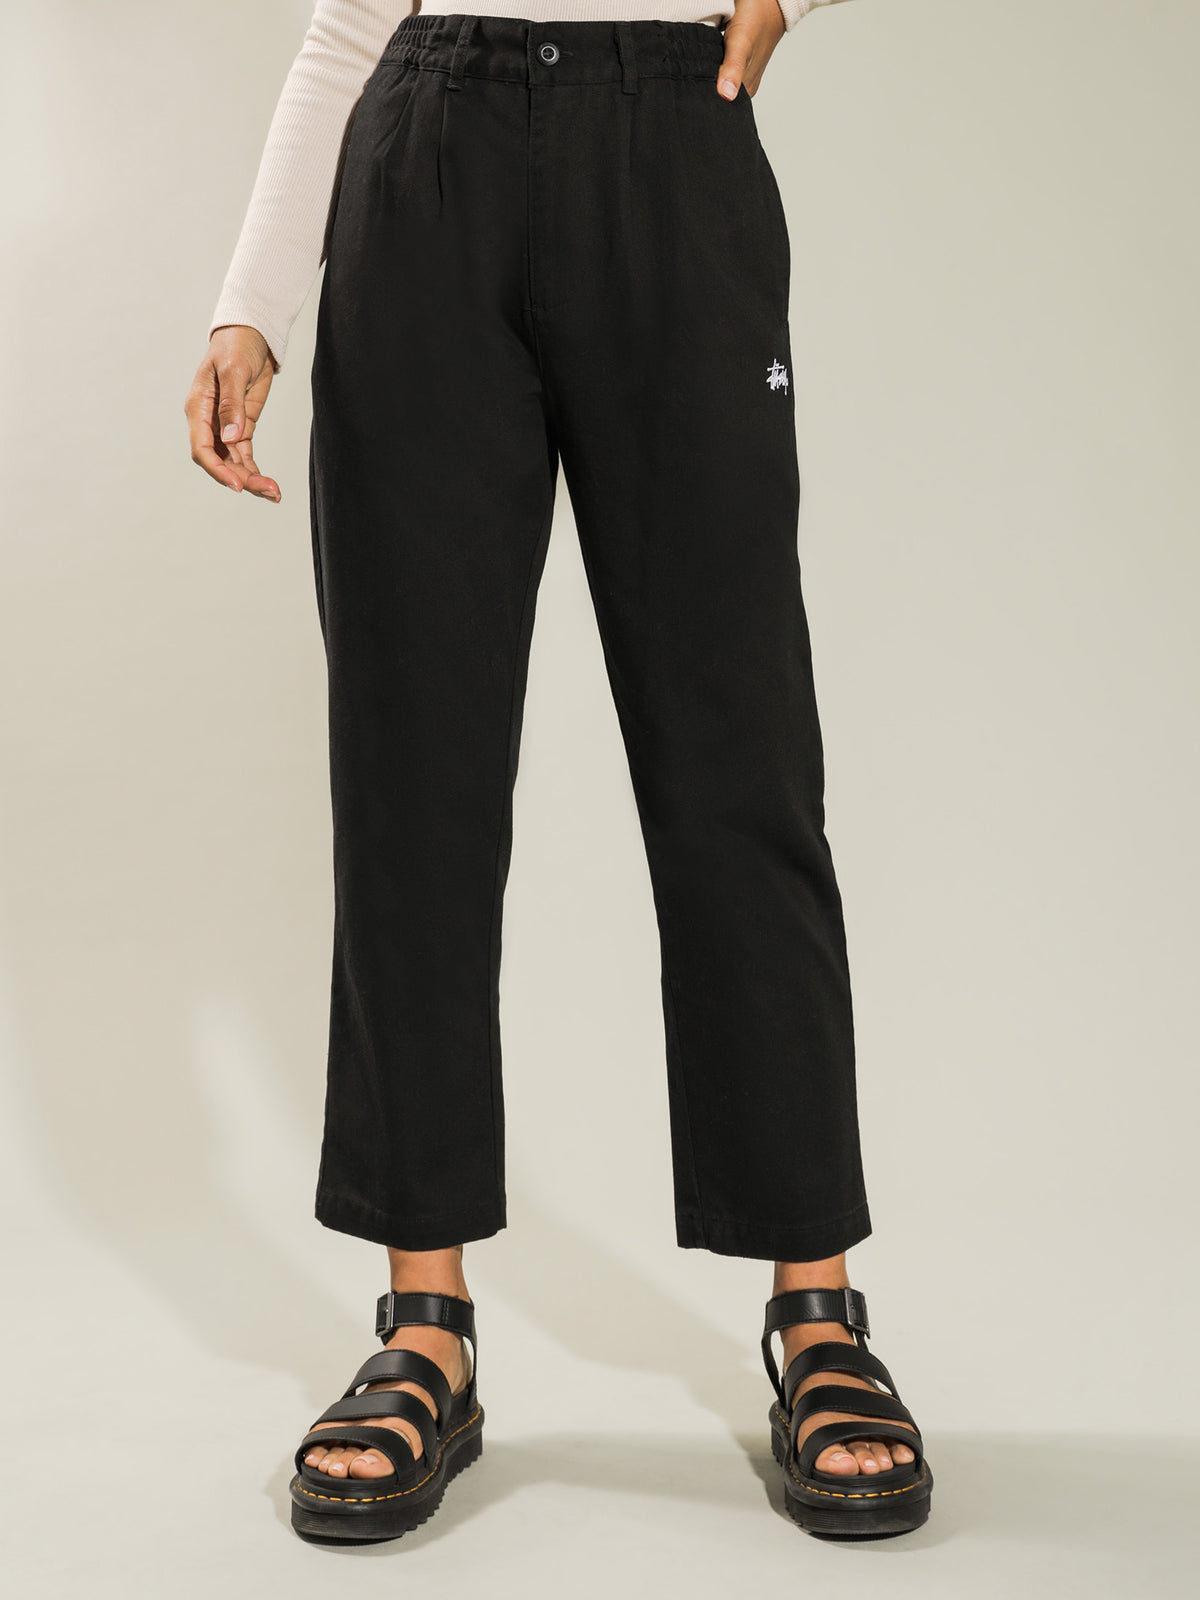 Colfax High Waisted Pants in Black